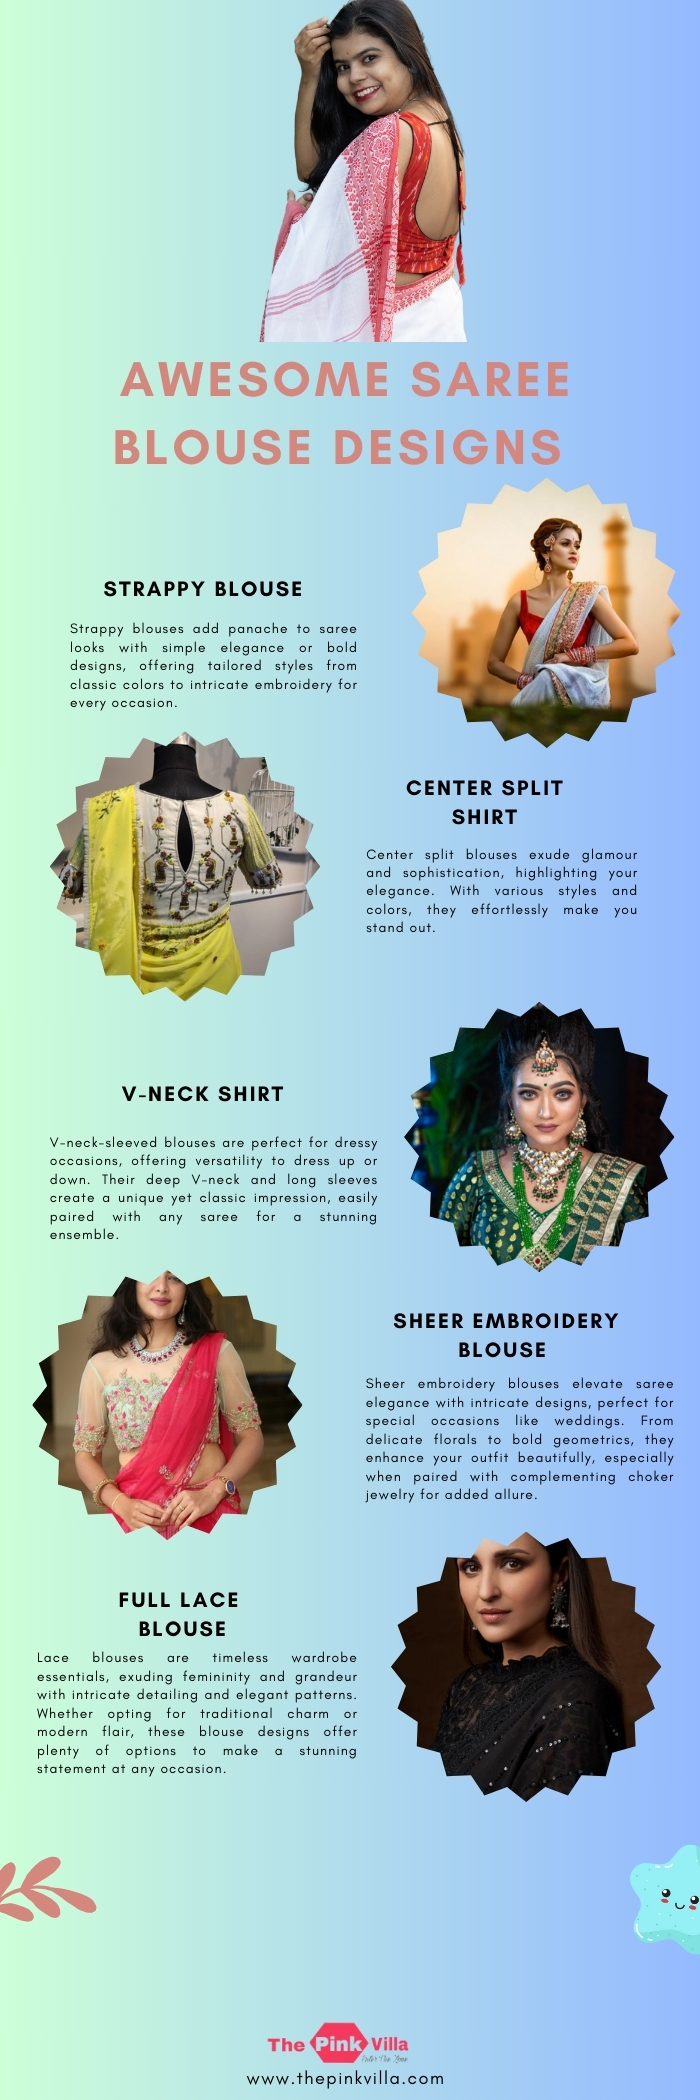 _Awesome Saree Blouse Designs